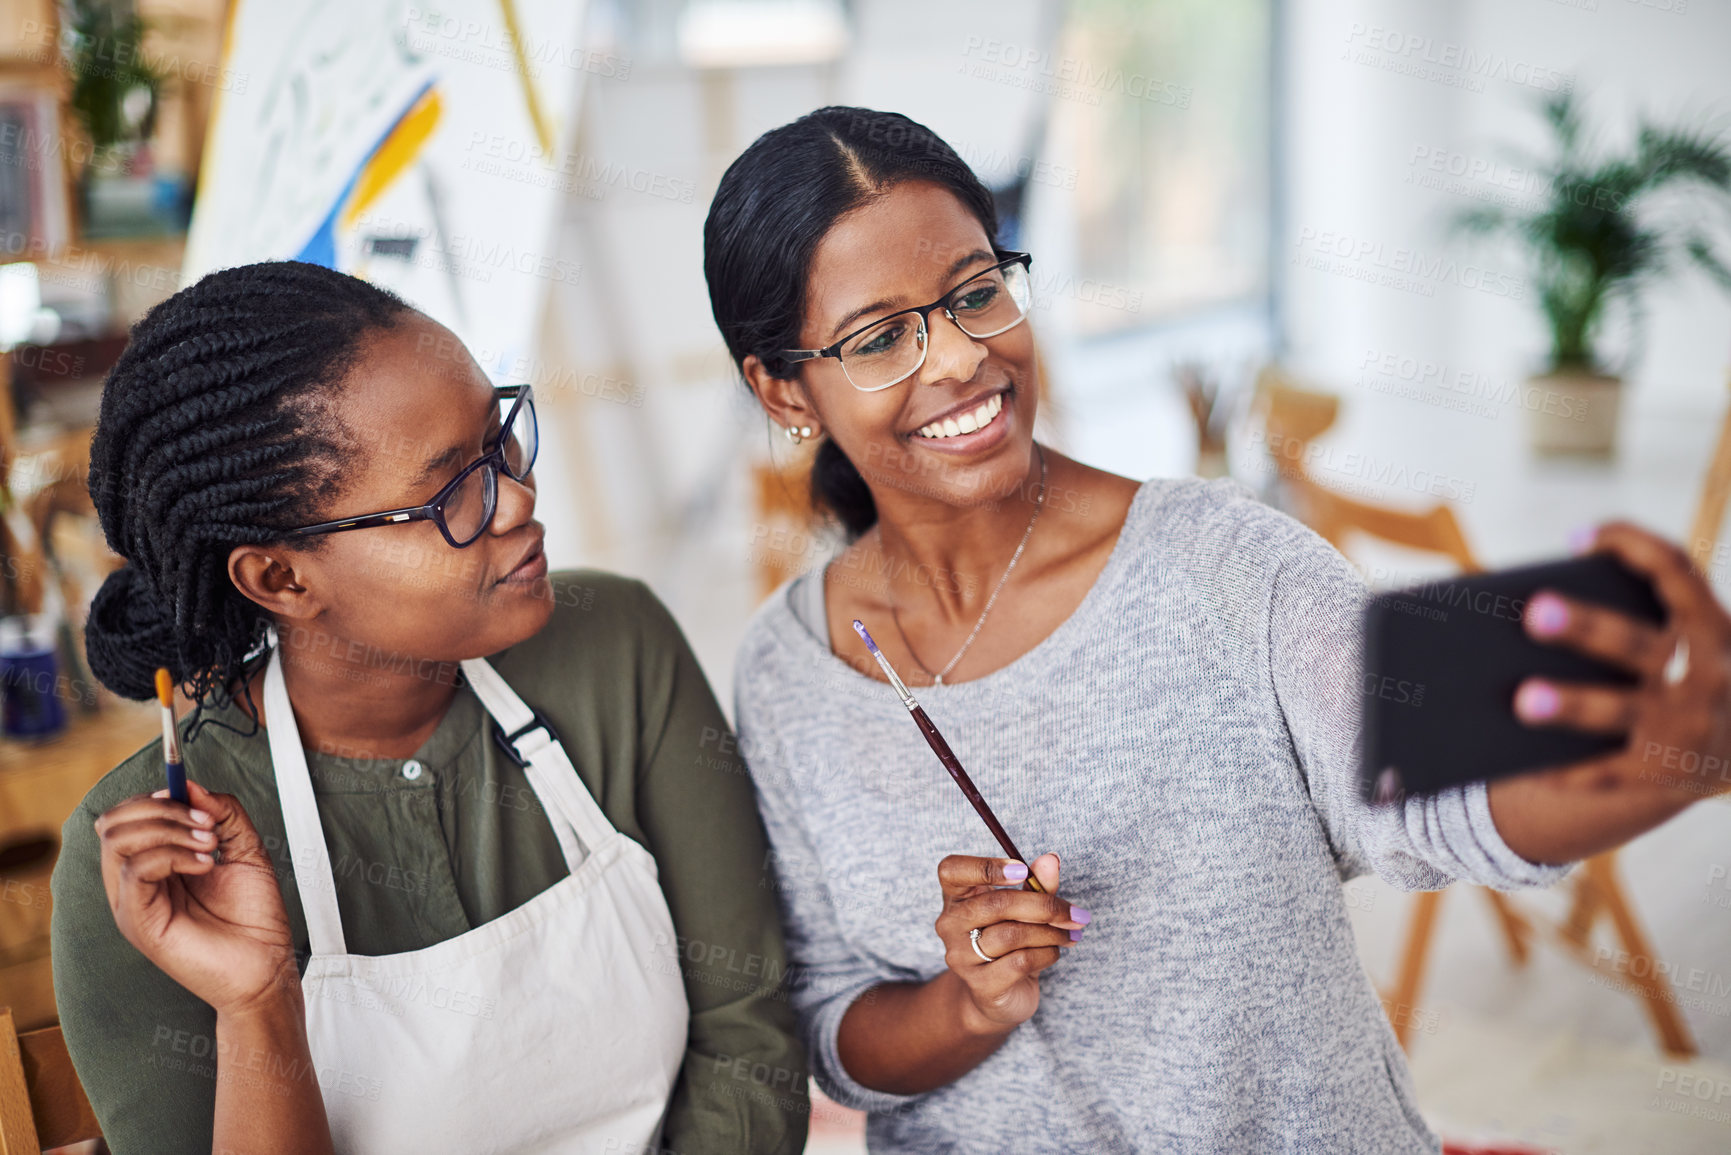 Buy stock photo Cropped shot of two young women taking a selfie while painting in a art studio